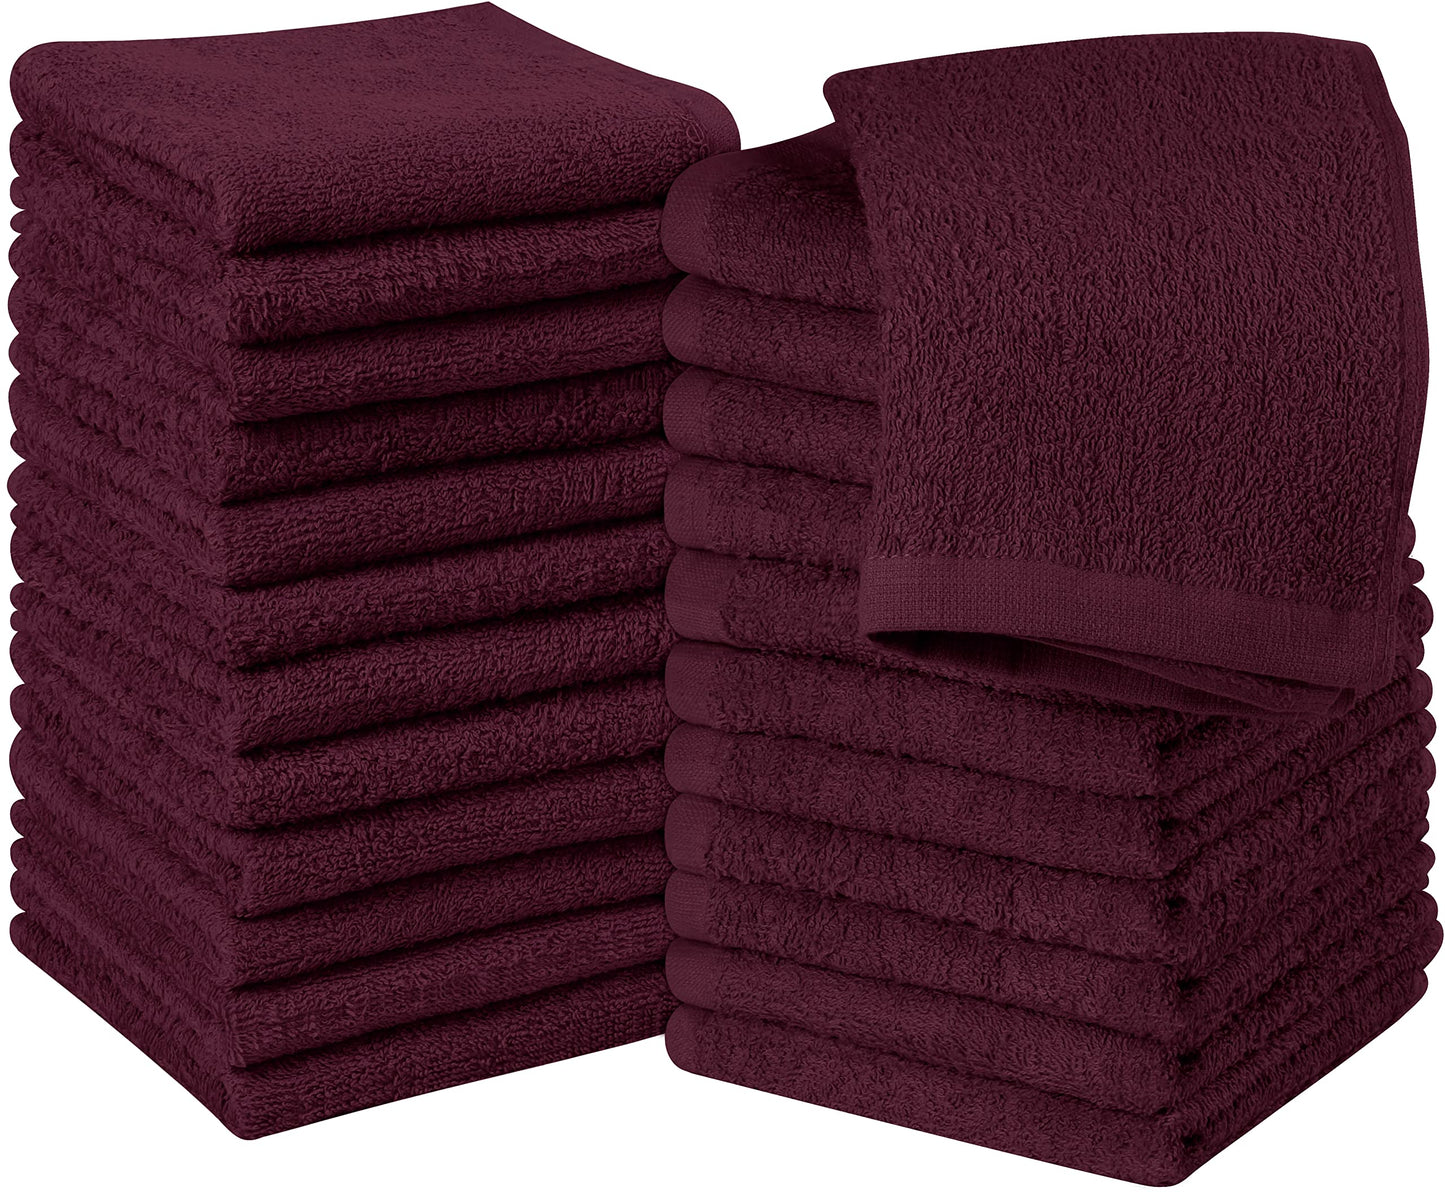 Utopia Towels 24 Pack Cotton Washcloths Set - 100% Ring Spun Cotton, Premium Quality Flannel Face Cloths, Highly Absorbent and Soft Feel Fingertip Towels (Burgundy)